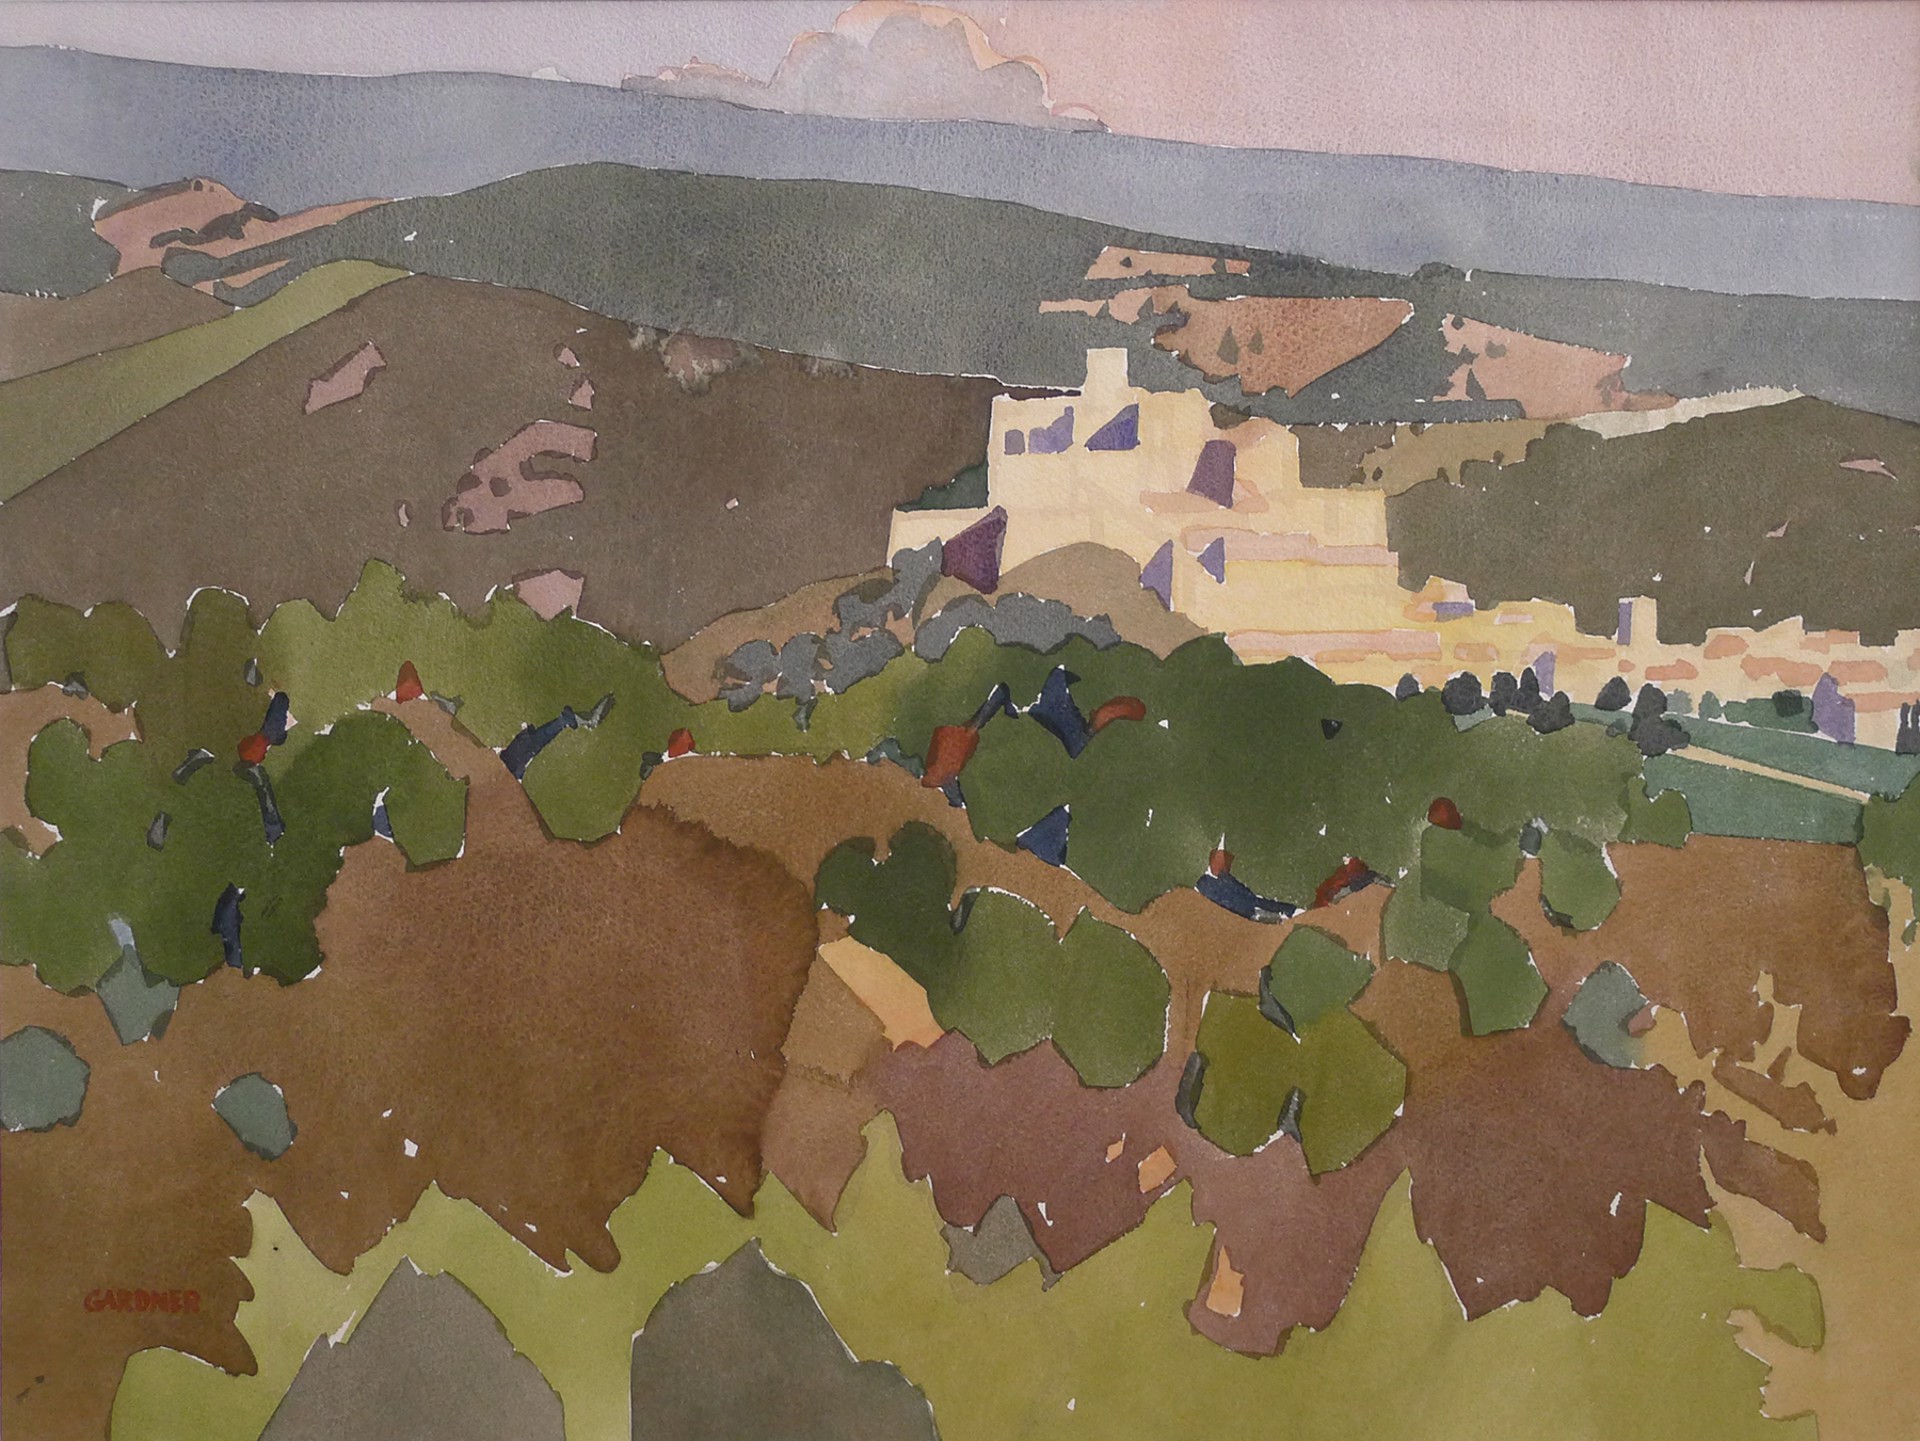 Le Barroux - With Hills, Provencal Village by Sheila Gardner